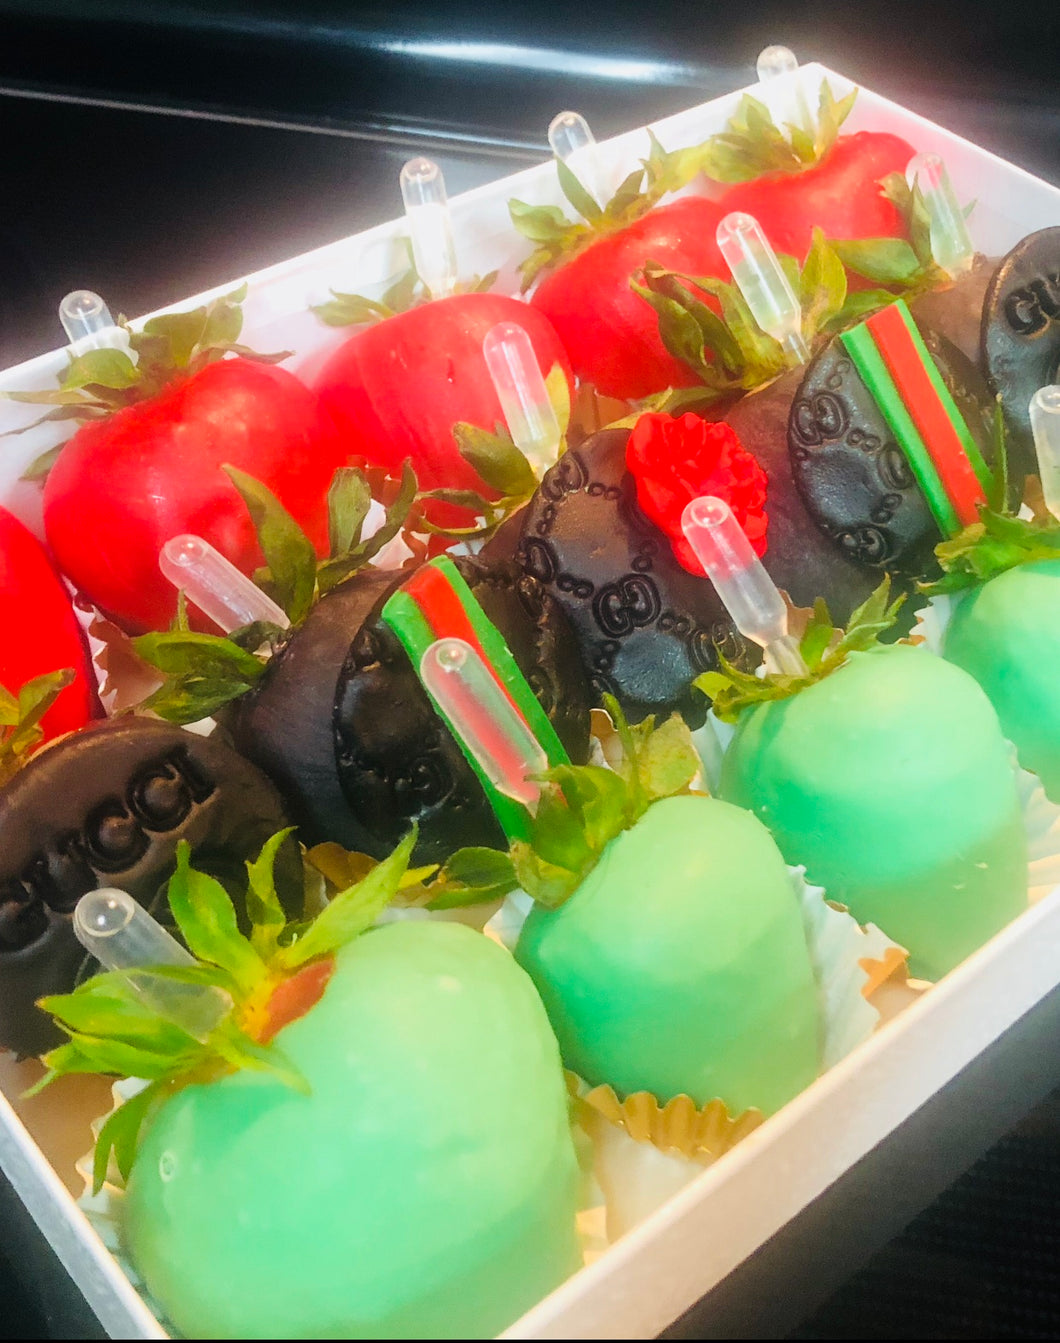 Infused Designer Inspired Chocolate Covered Strawberries